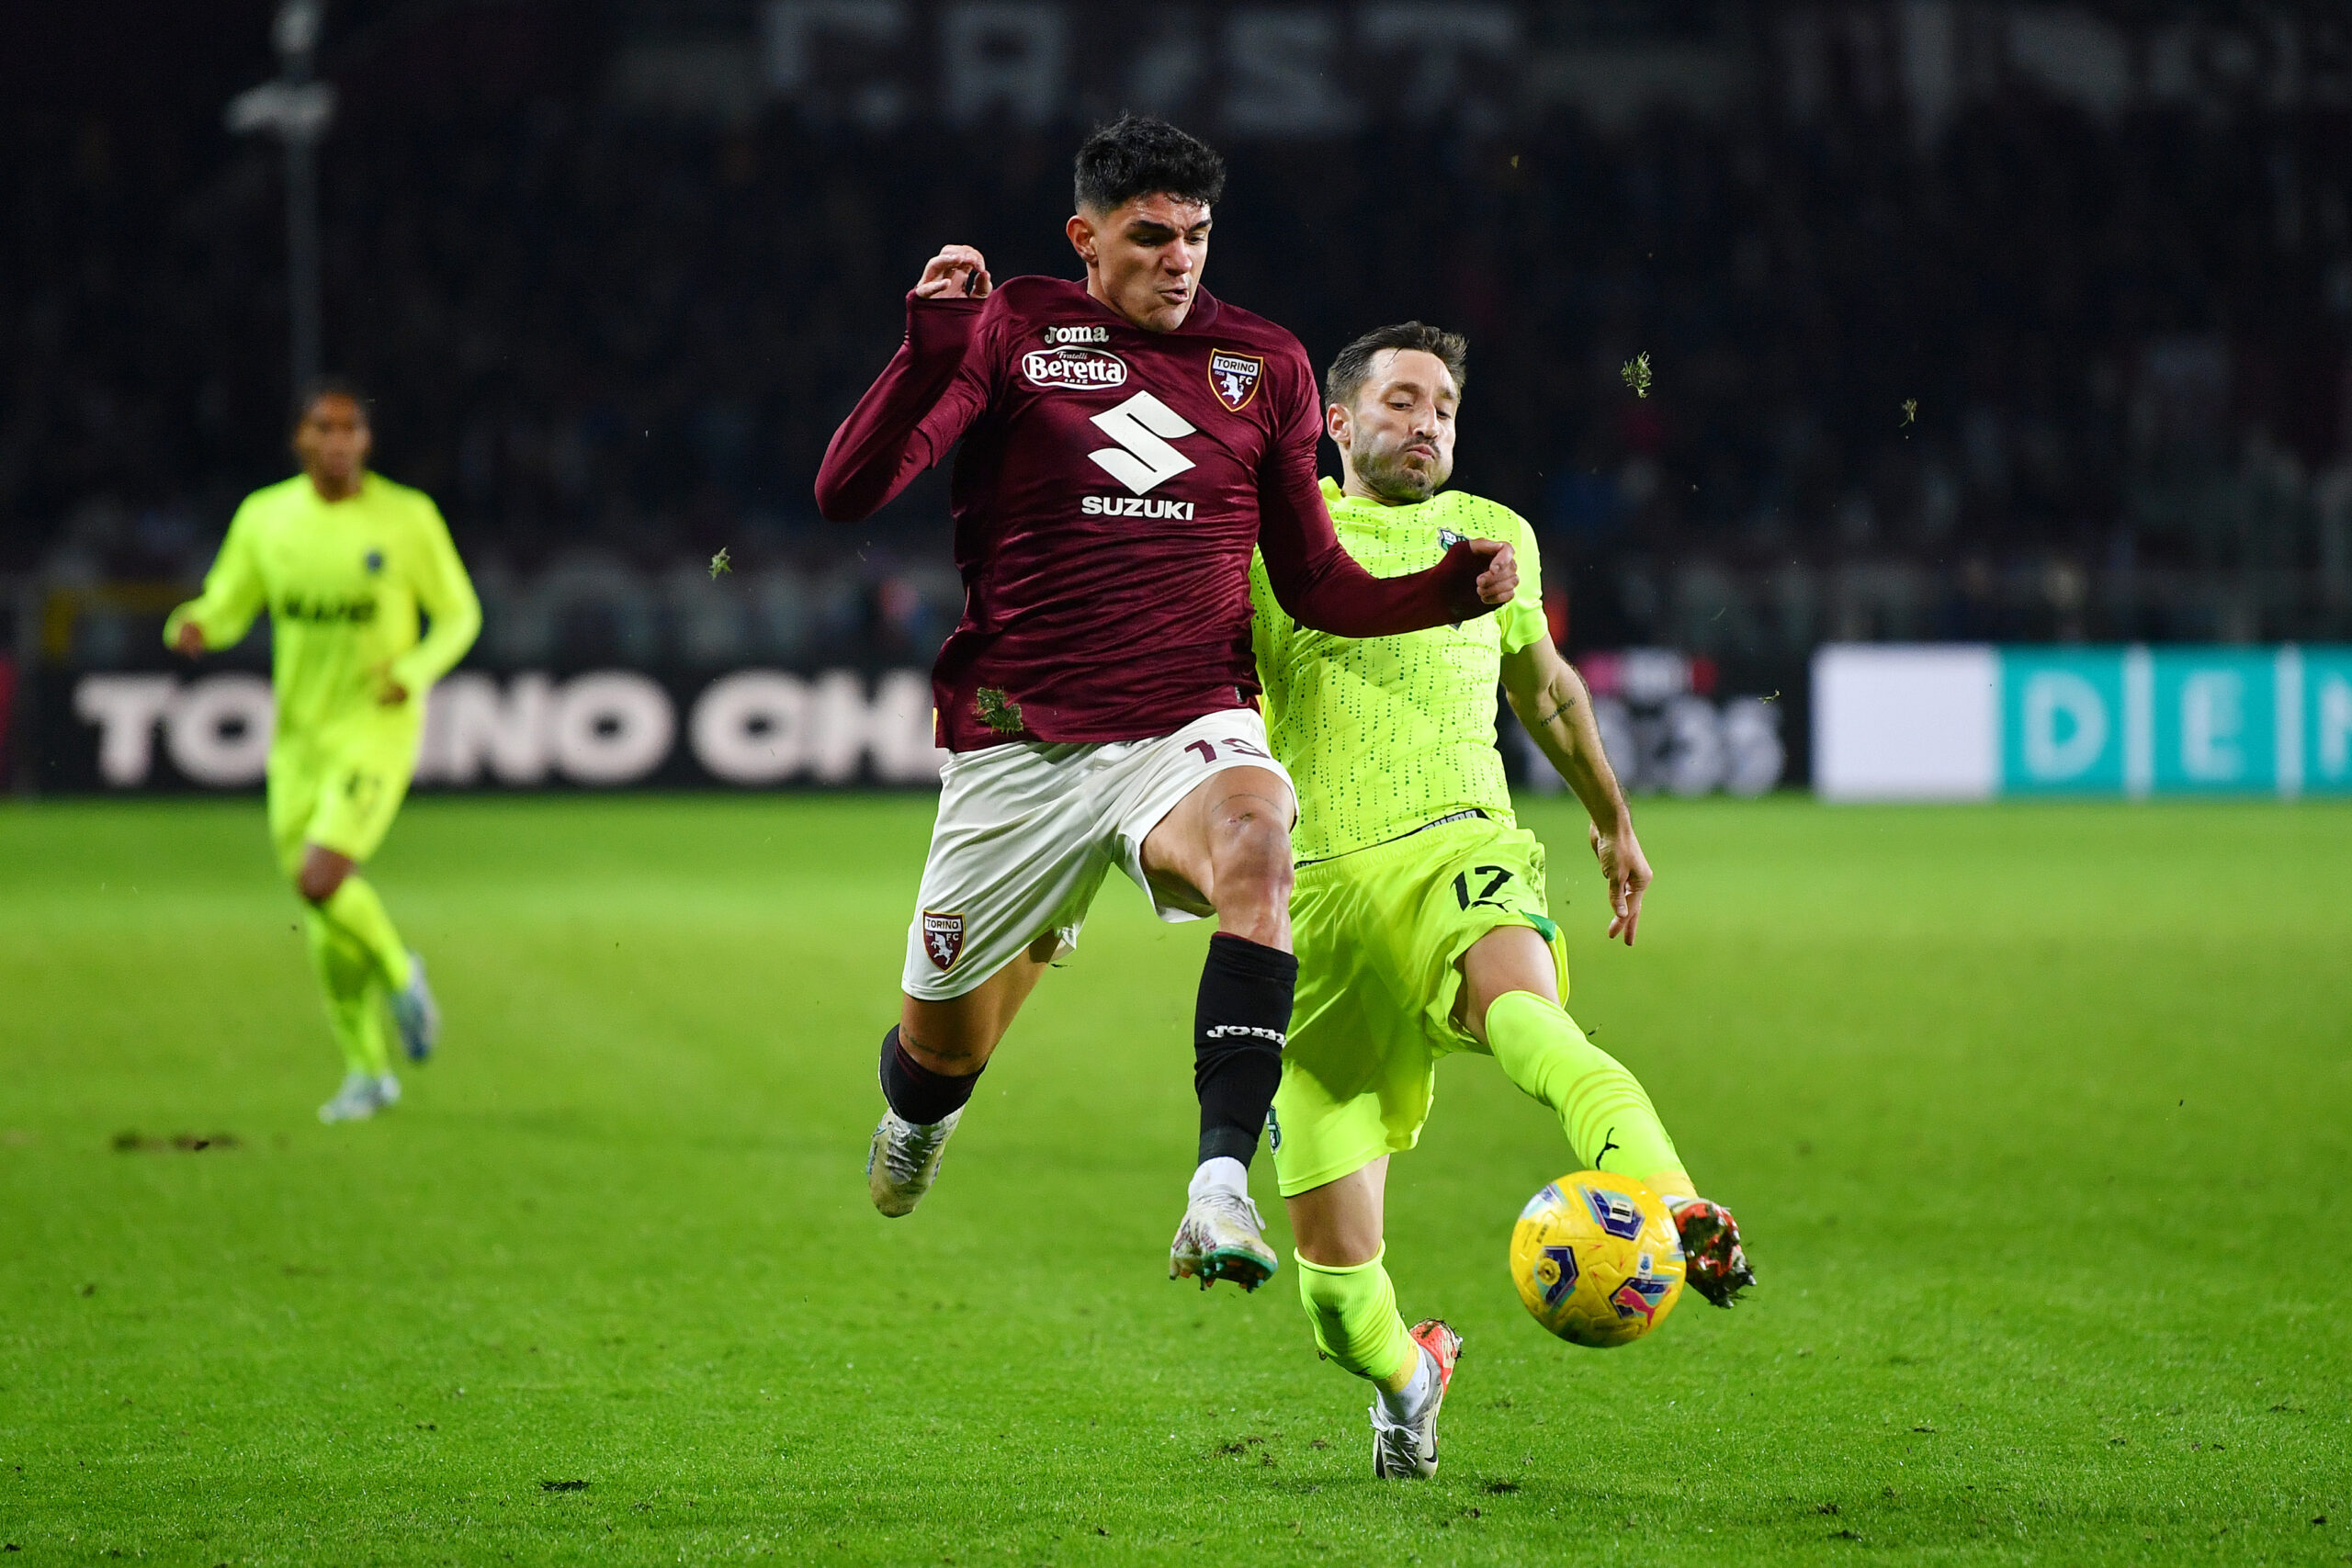 Raoul Bellanova coronated his superb campaign with Torino with his Italy debut on Sunday. The Granata scooped him up for €7M.